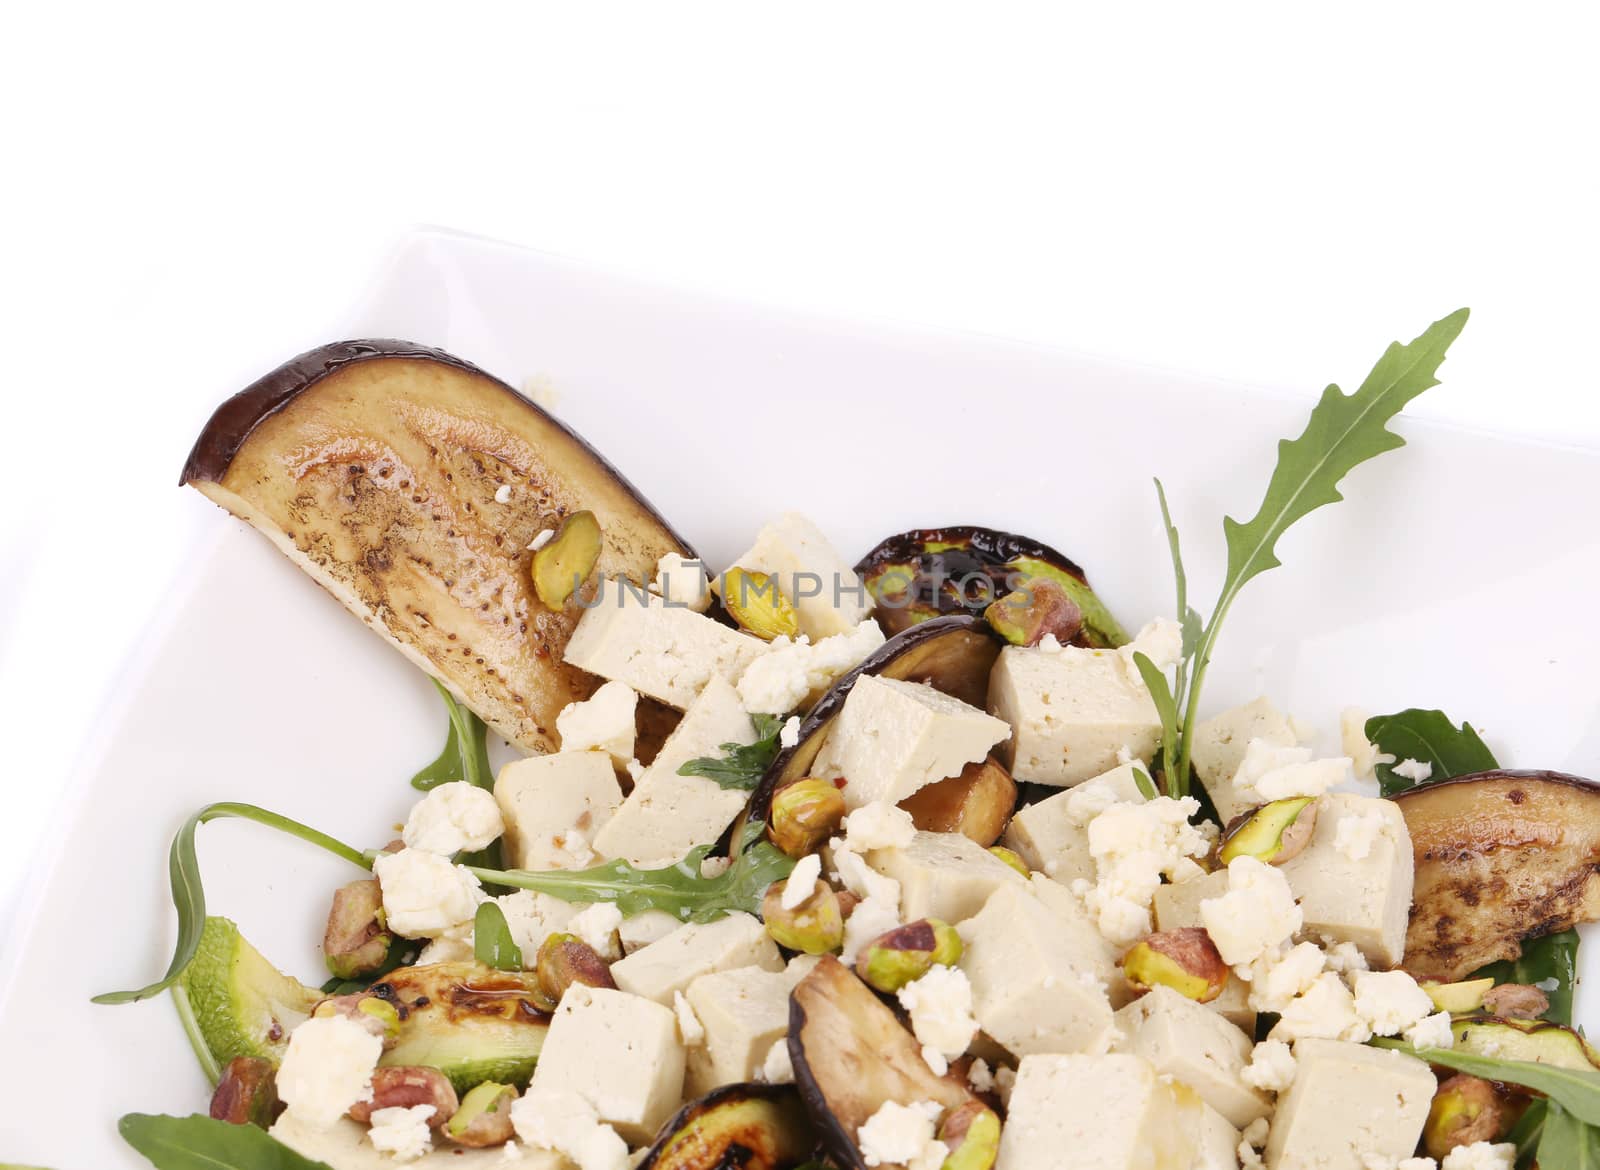 Salad with grilled vegetables and tofu. by indigolotos